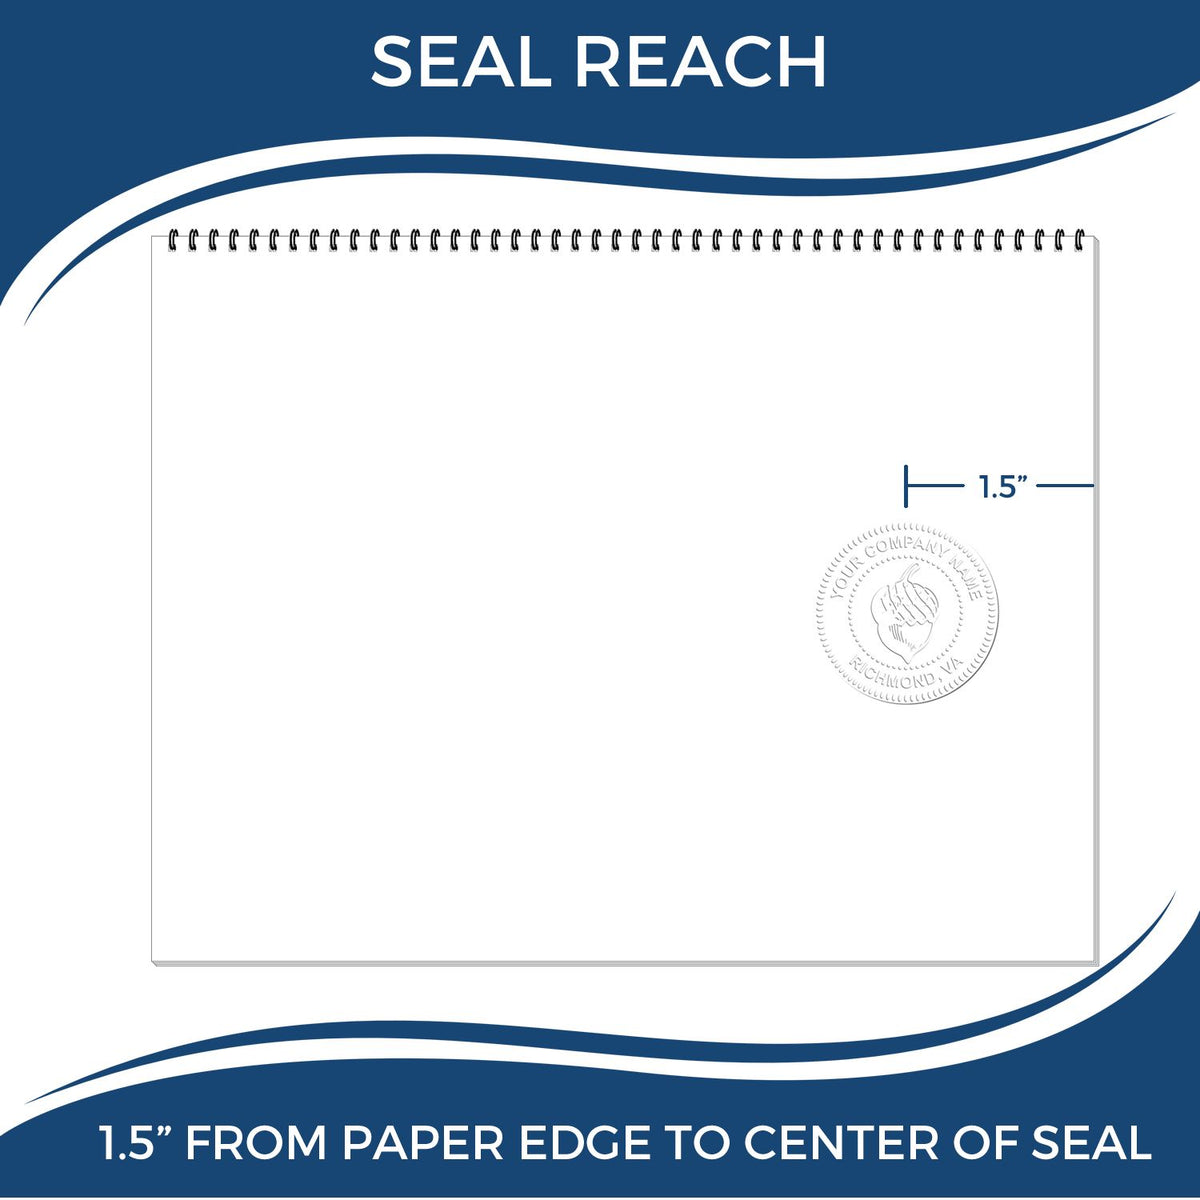 An infographic showing the seal reach which is represented by a ruler and a miniature seal image of the Hybrid Michigan Land Surveyor Seal